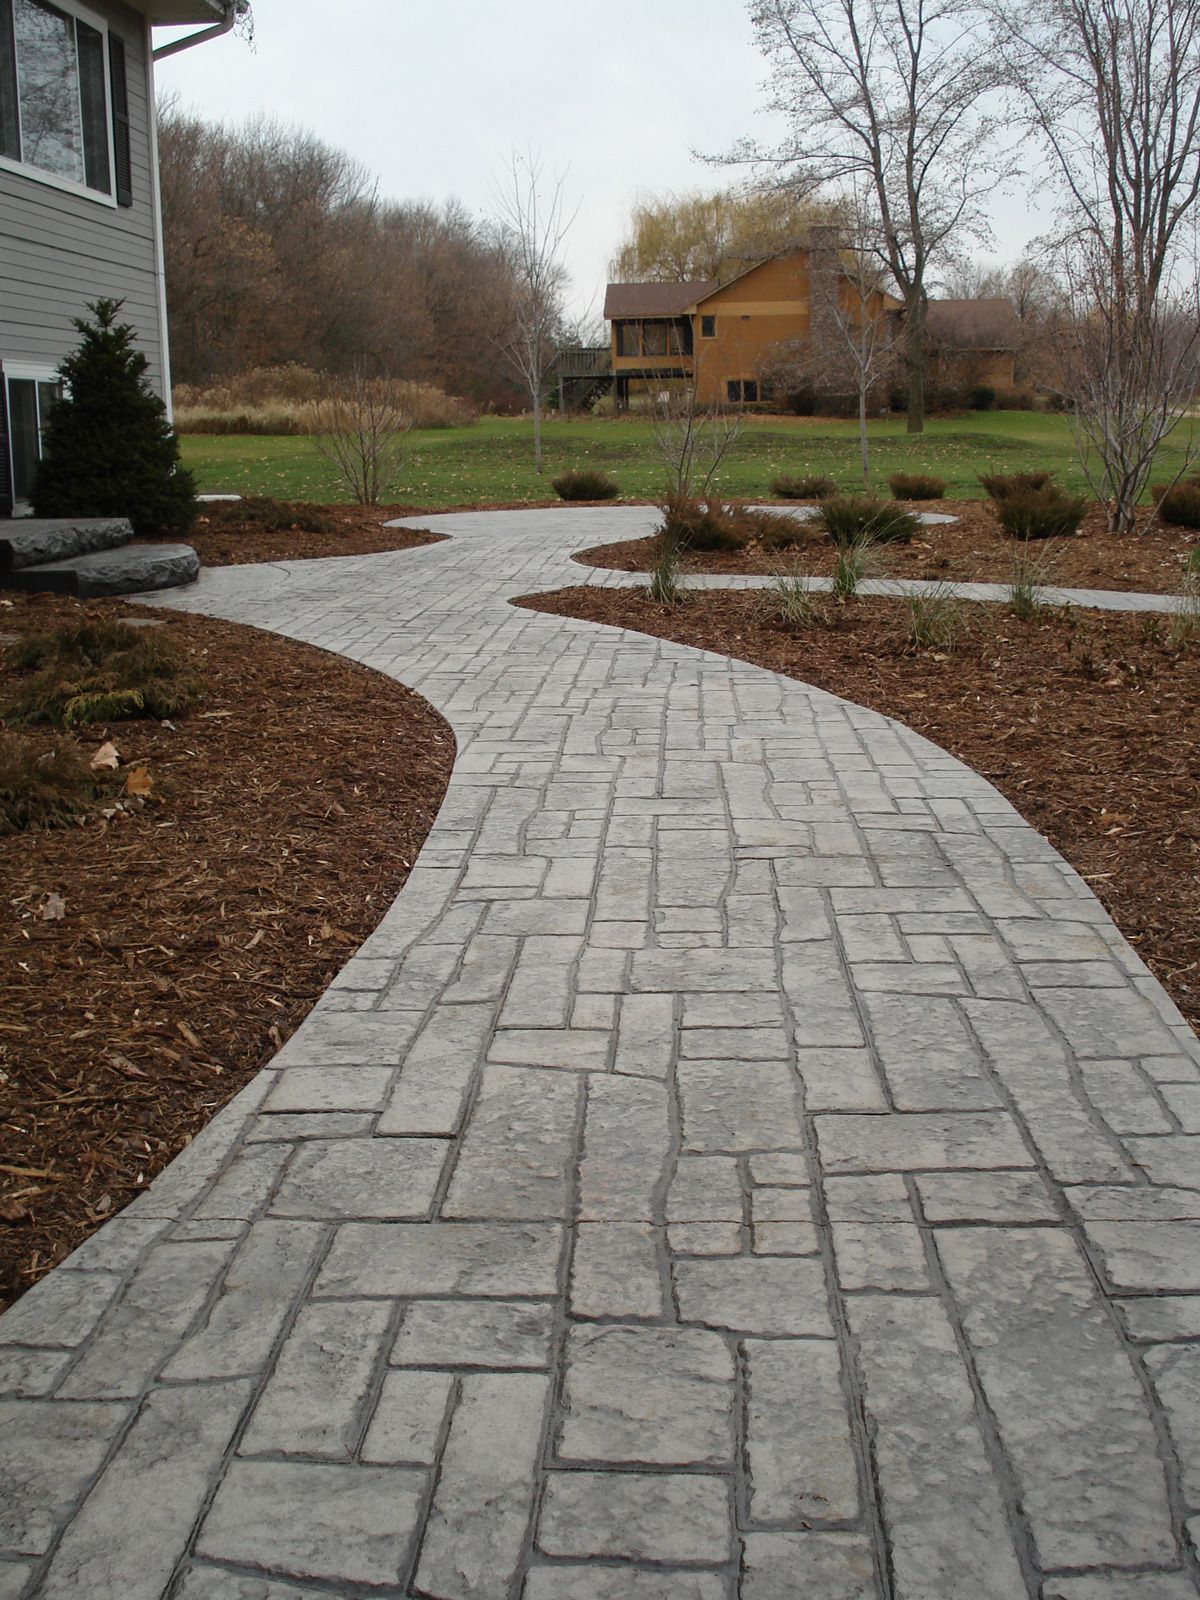 How To Use Concrete For Your Concrete Driveway In Poway Ca?